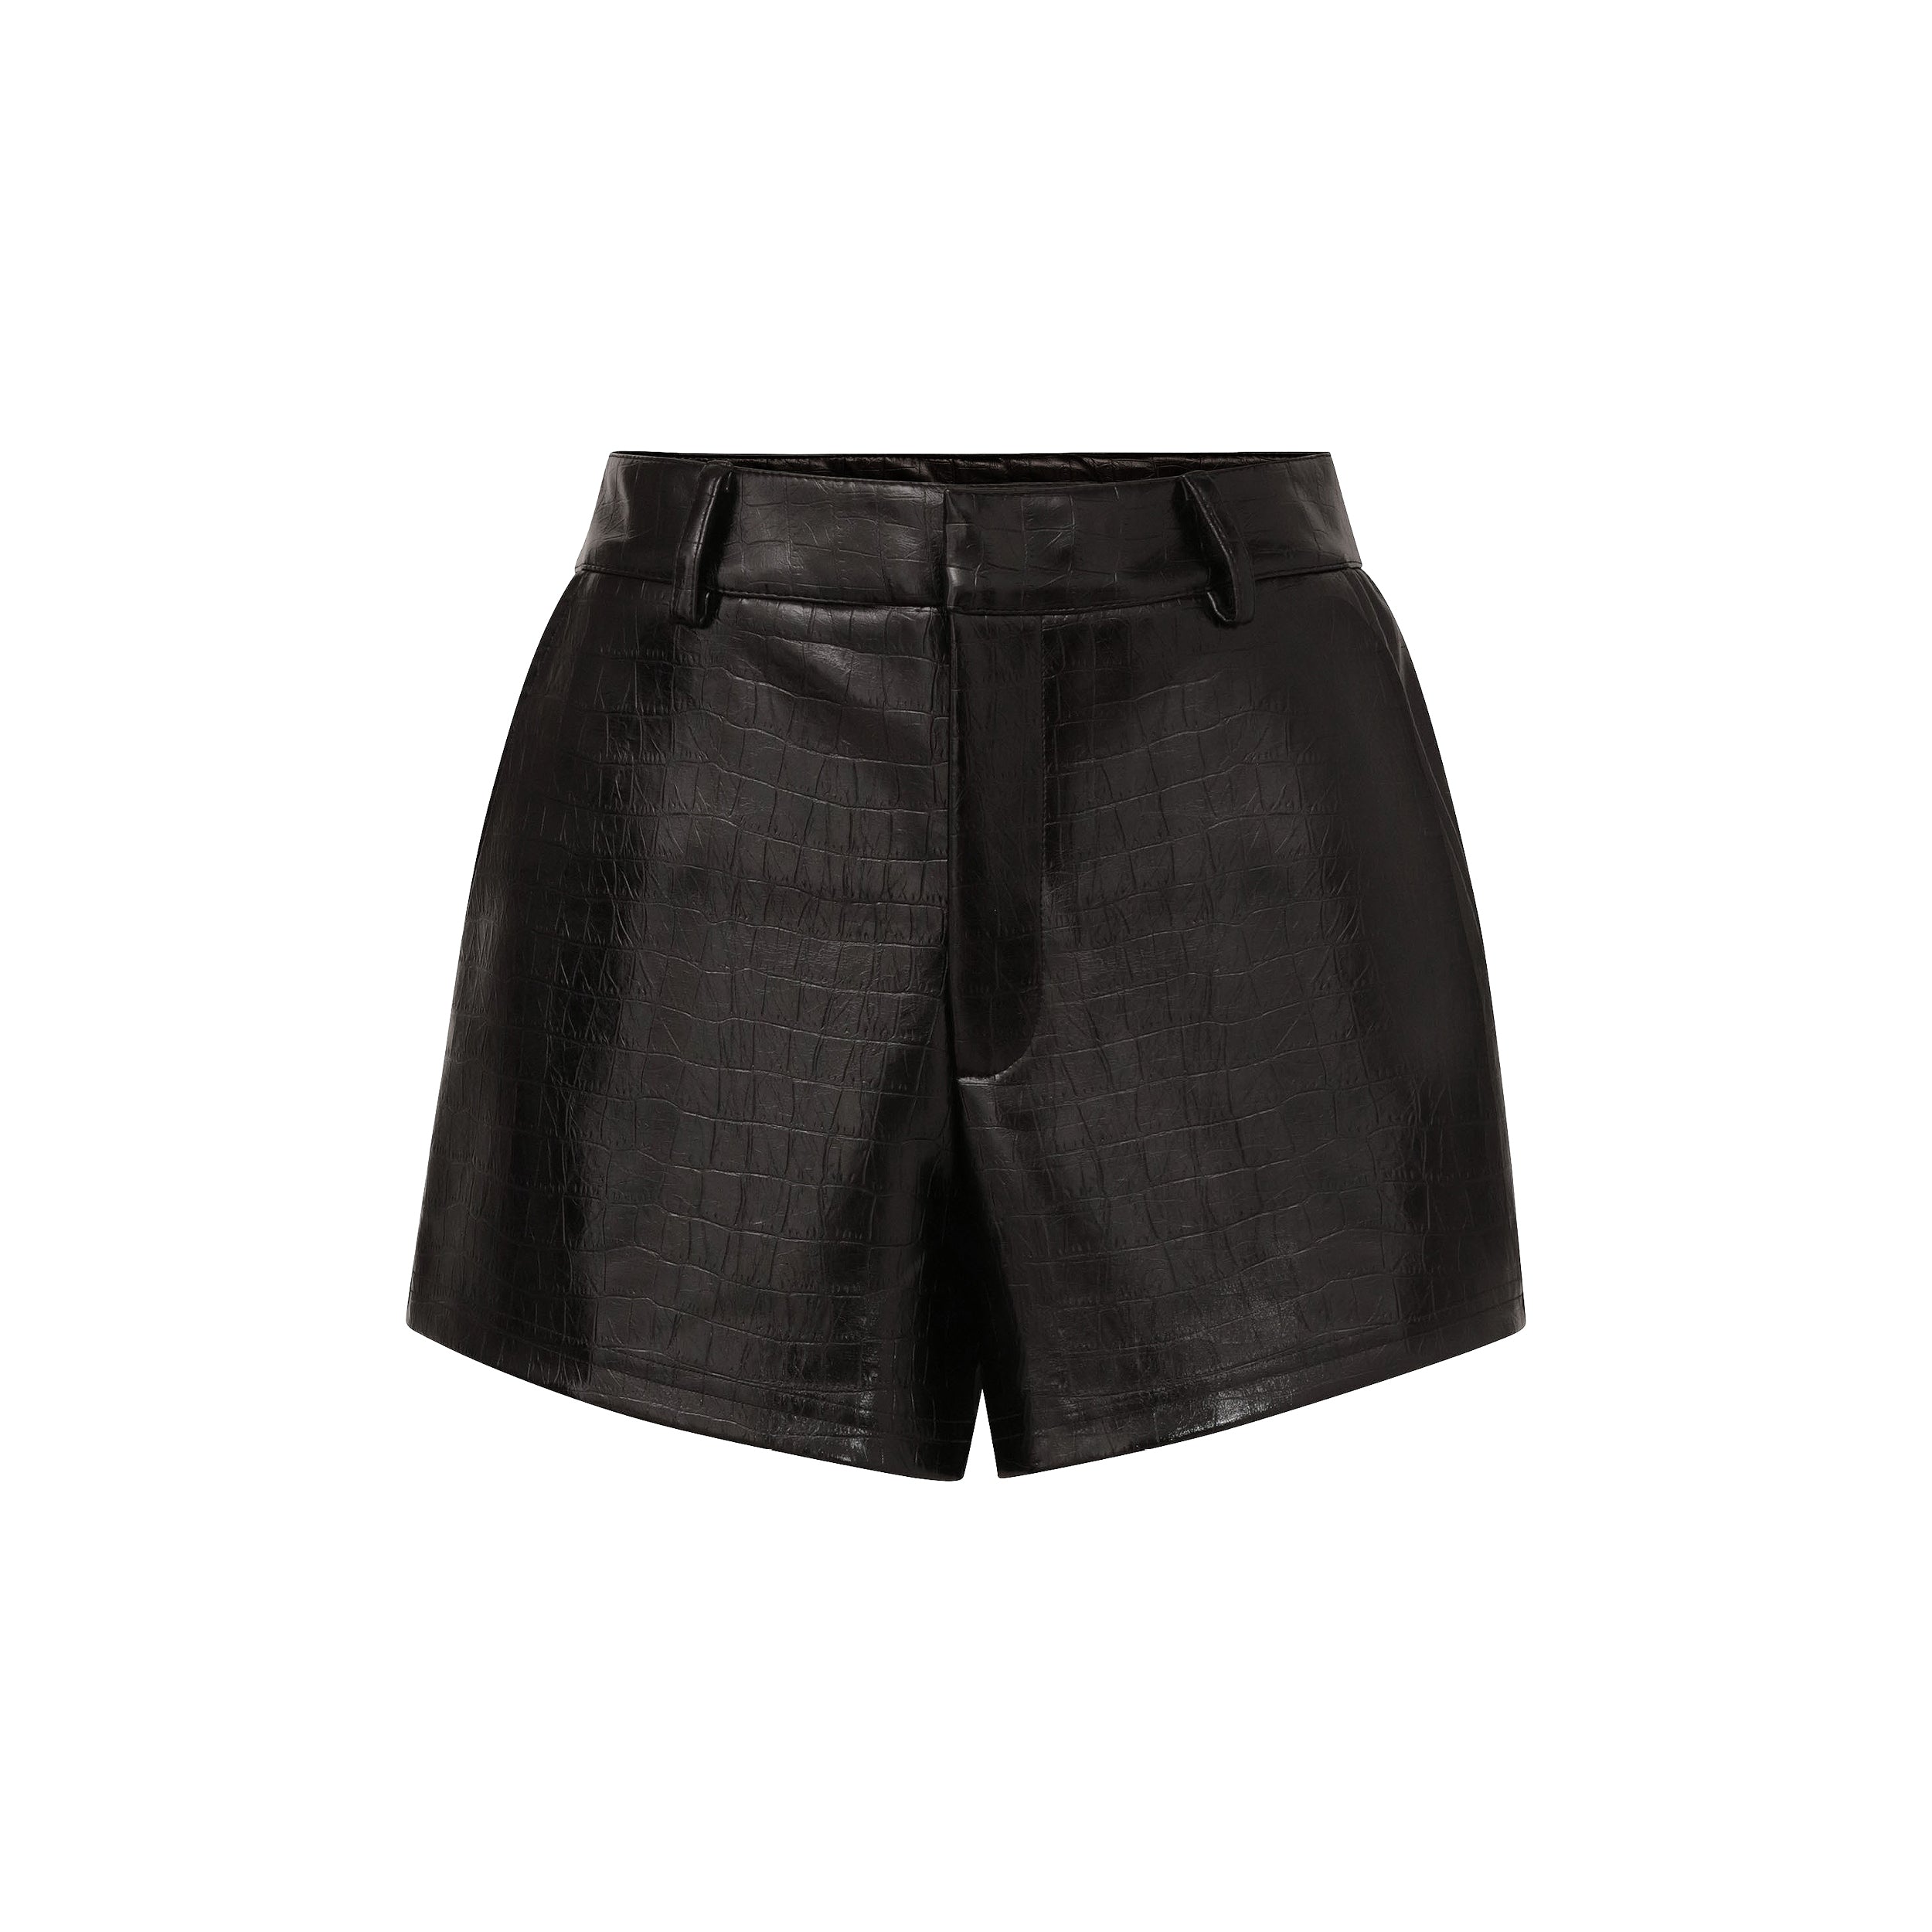 Front view product shot of black faux leather short with croco embossed pattern.